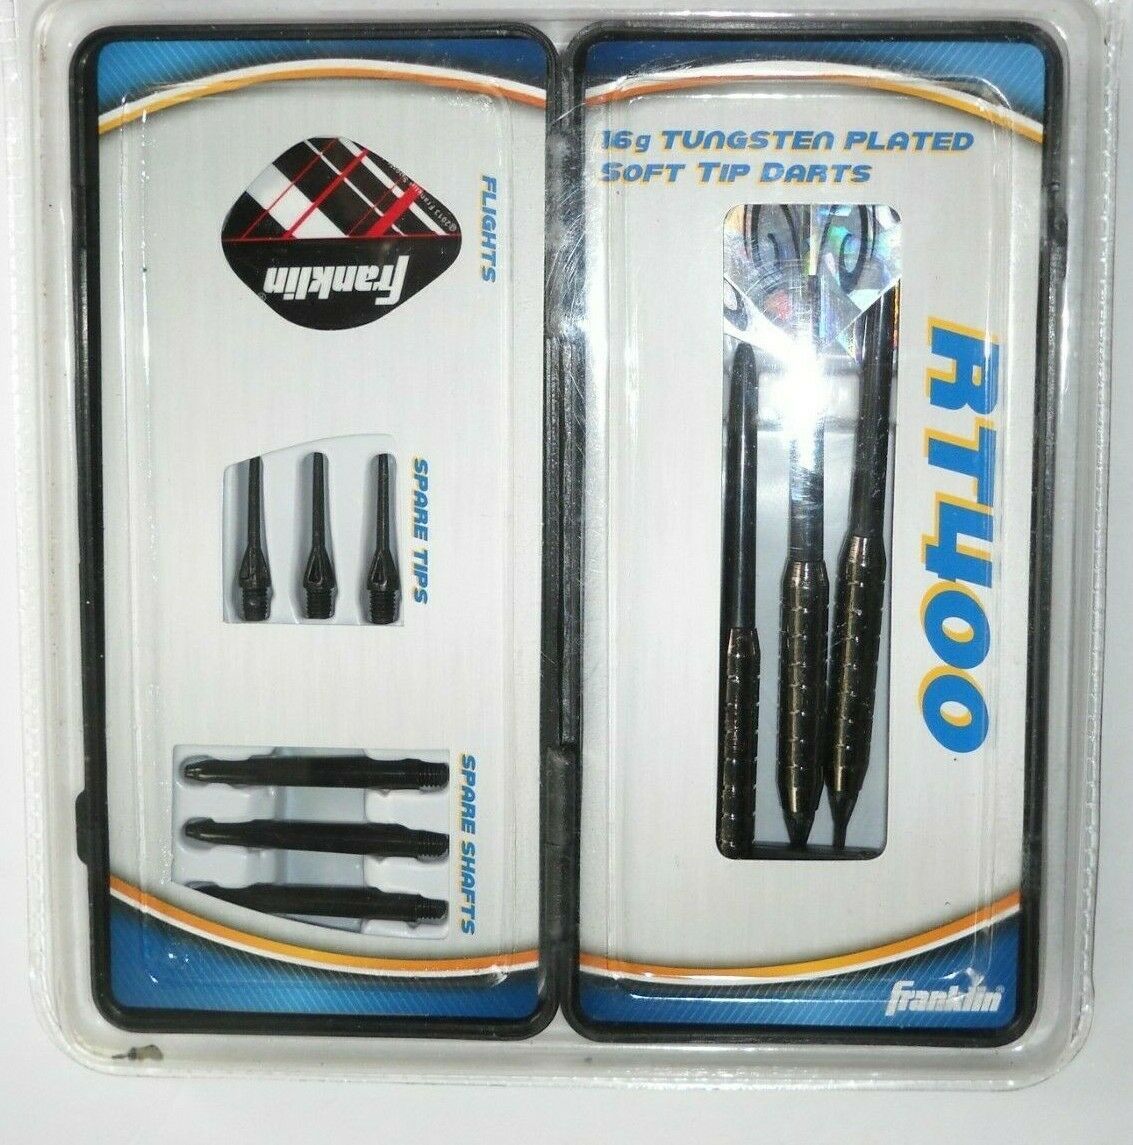 Primary image for FRANKLIN RT400 16g Tungsten Plated SOFT TIP DARTS ~ NIP